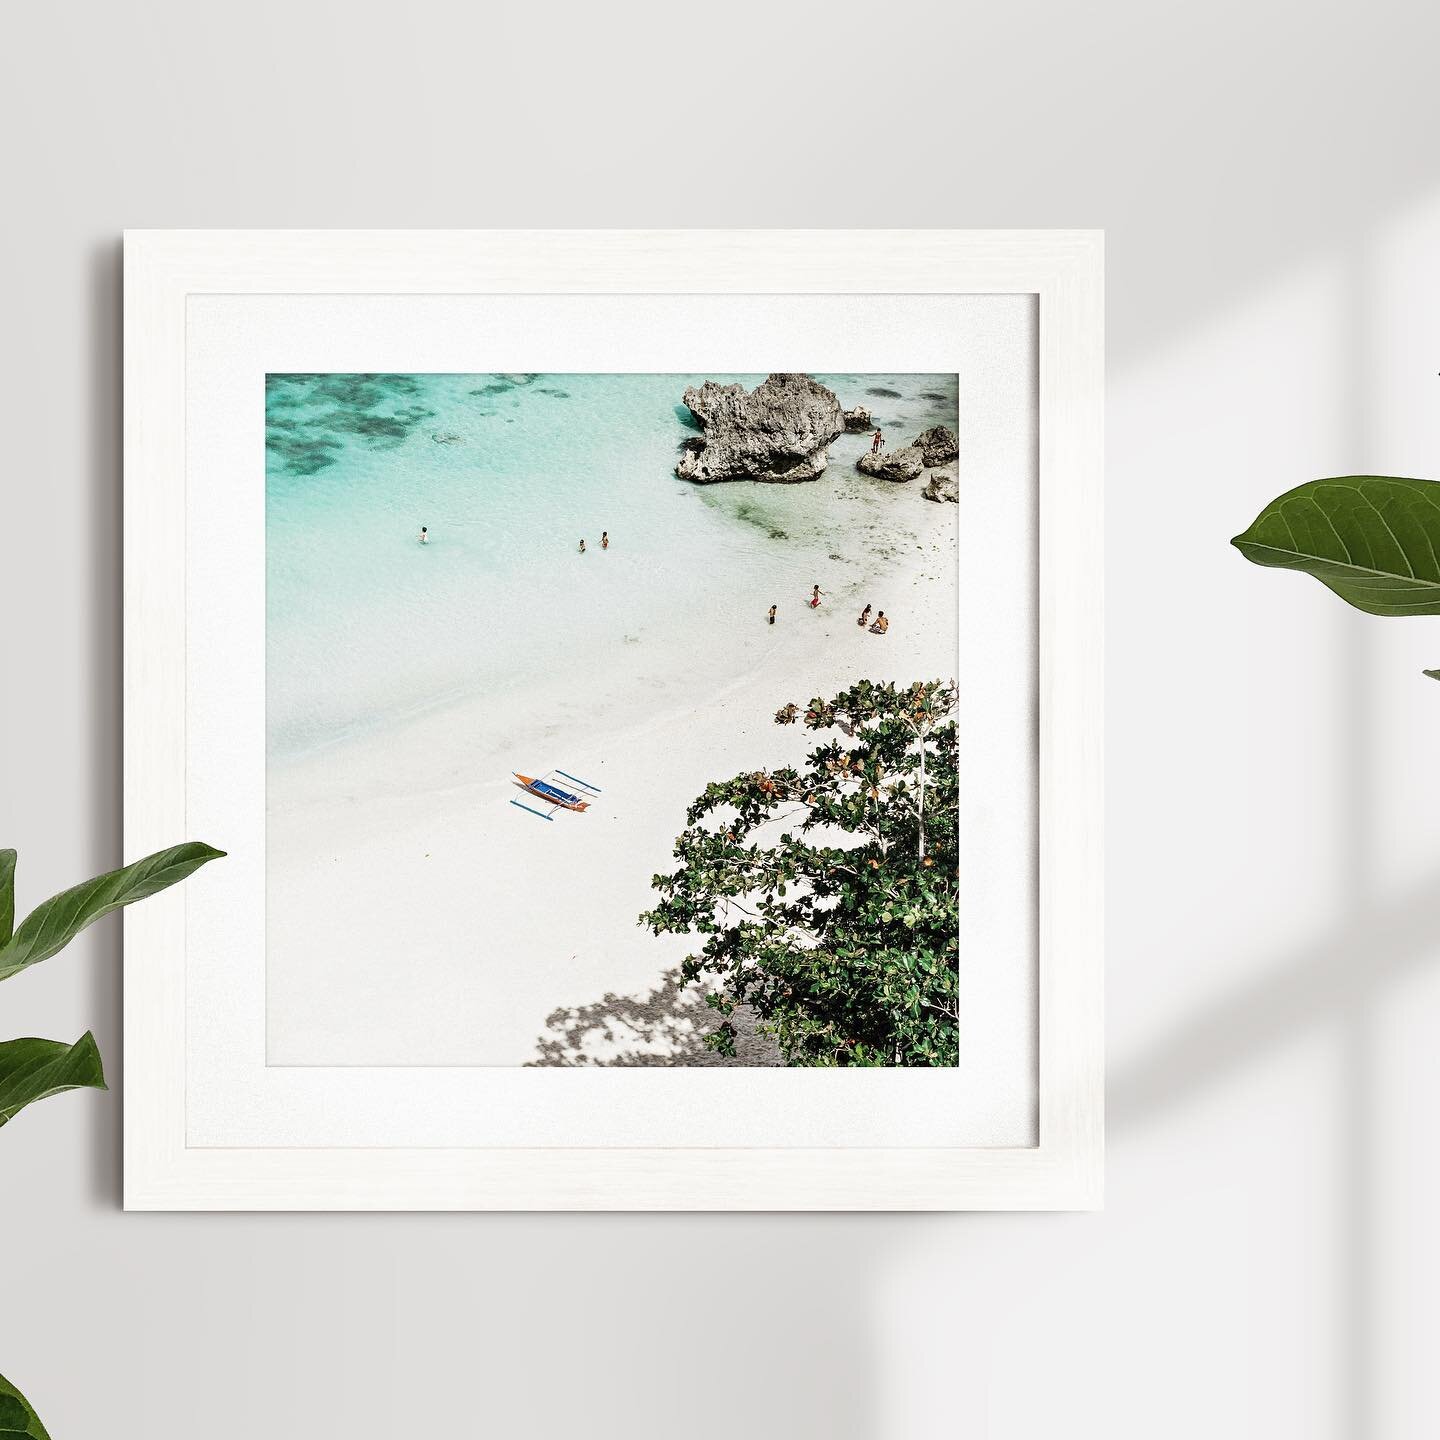 One of our photos featured in the Unsplash Editorial is now available in black and white frames. 🏝 
-
#etsy #boracay #interiordesign #etsyshop #walldecor #homedecor